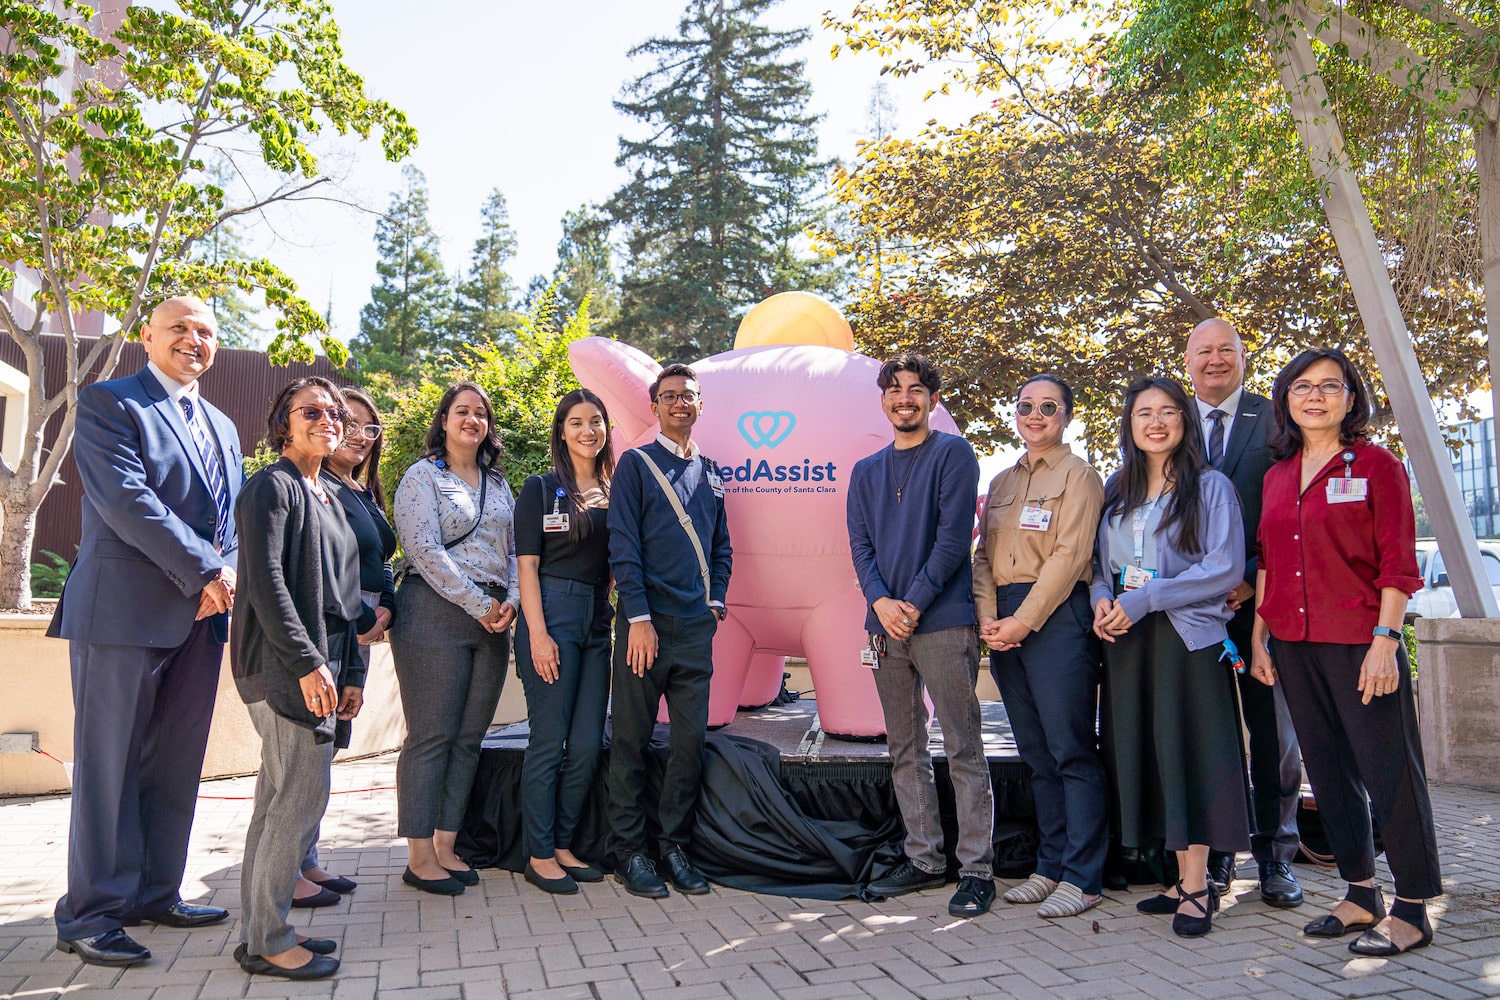 Group photo of MedAssist pharmacy team posing in front of inflatable Piggy Bank Mascot